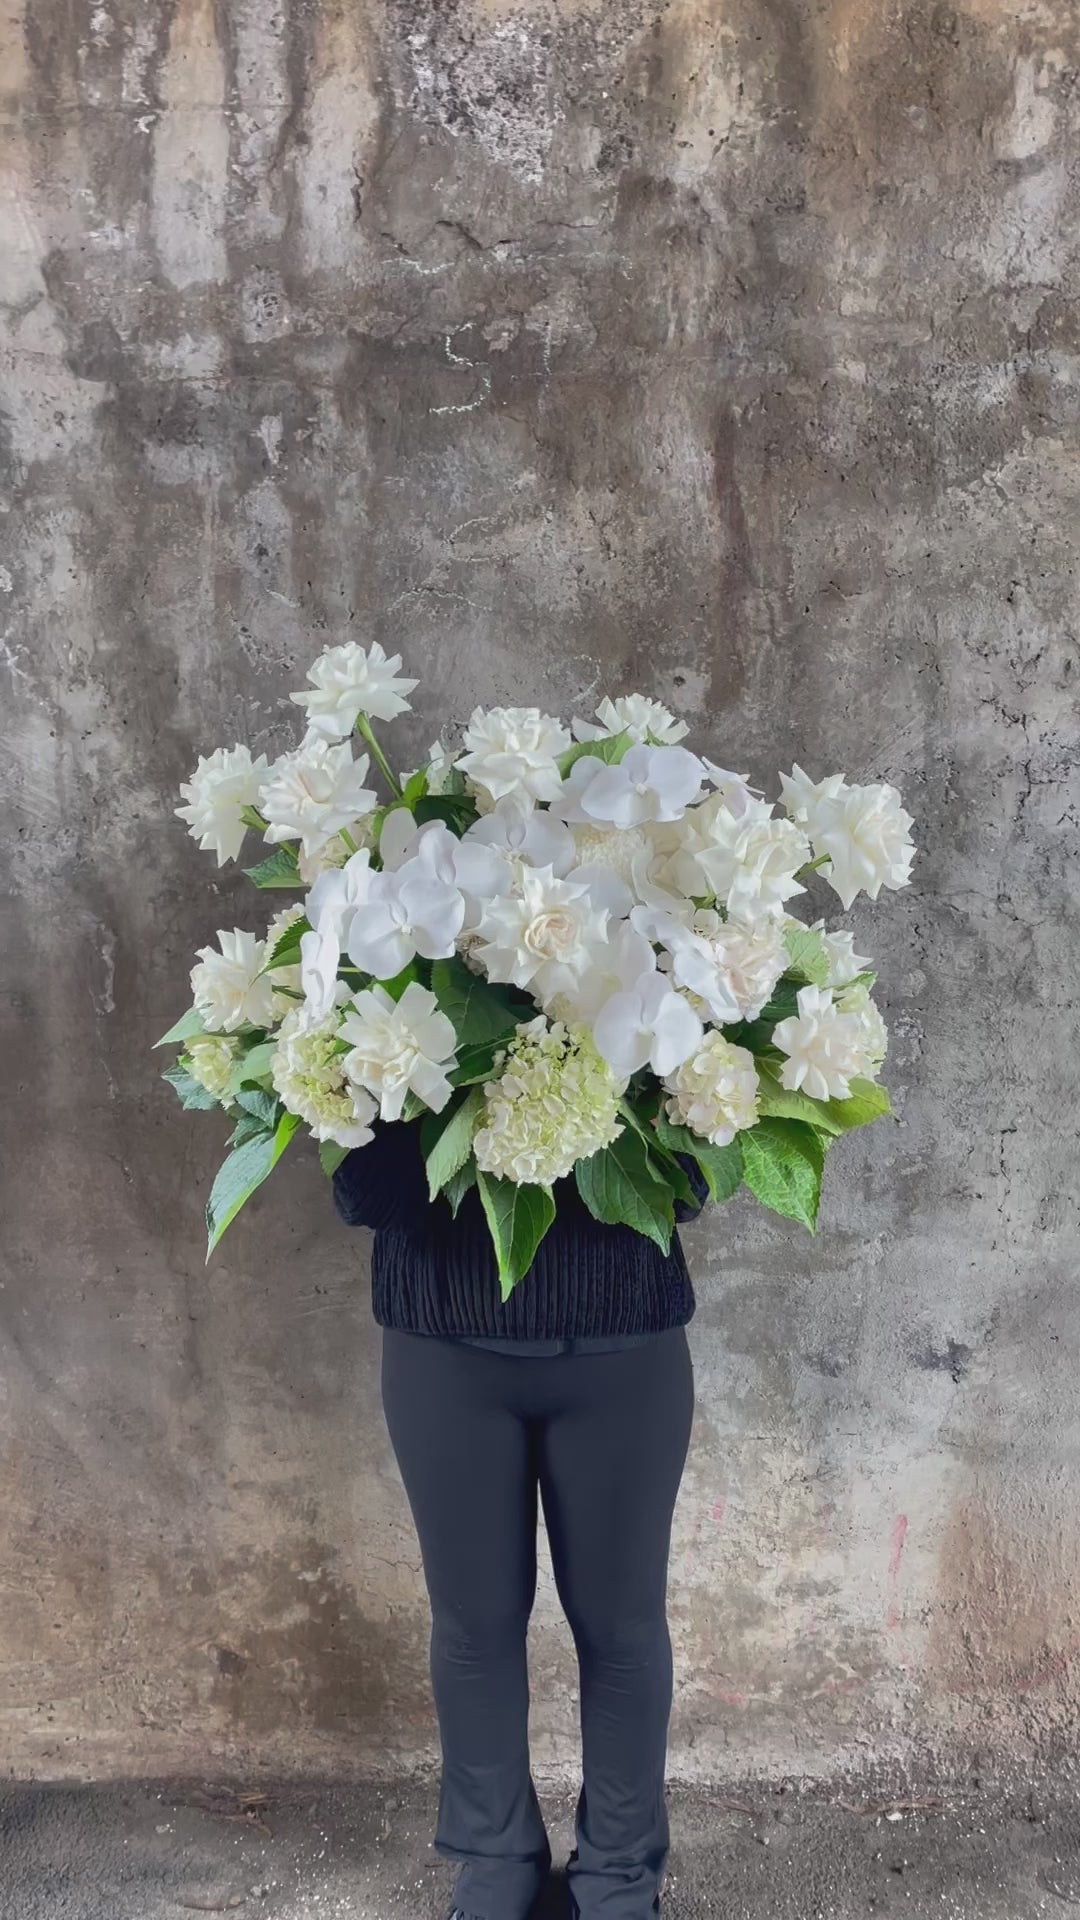 Video of Large white and green casket tribute design, being held by a florist wearing black and standing in front of a concrete wall.